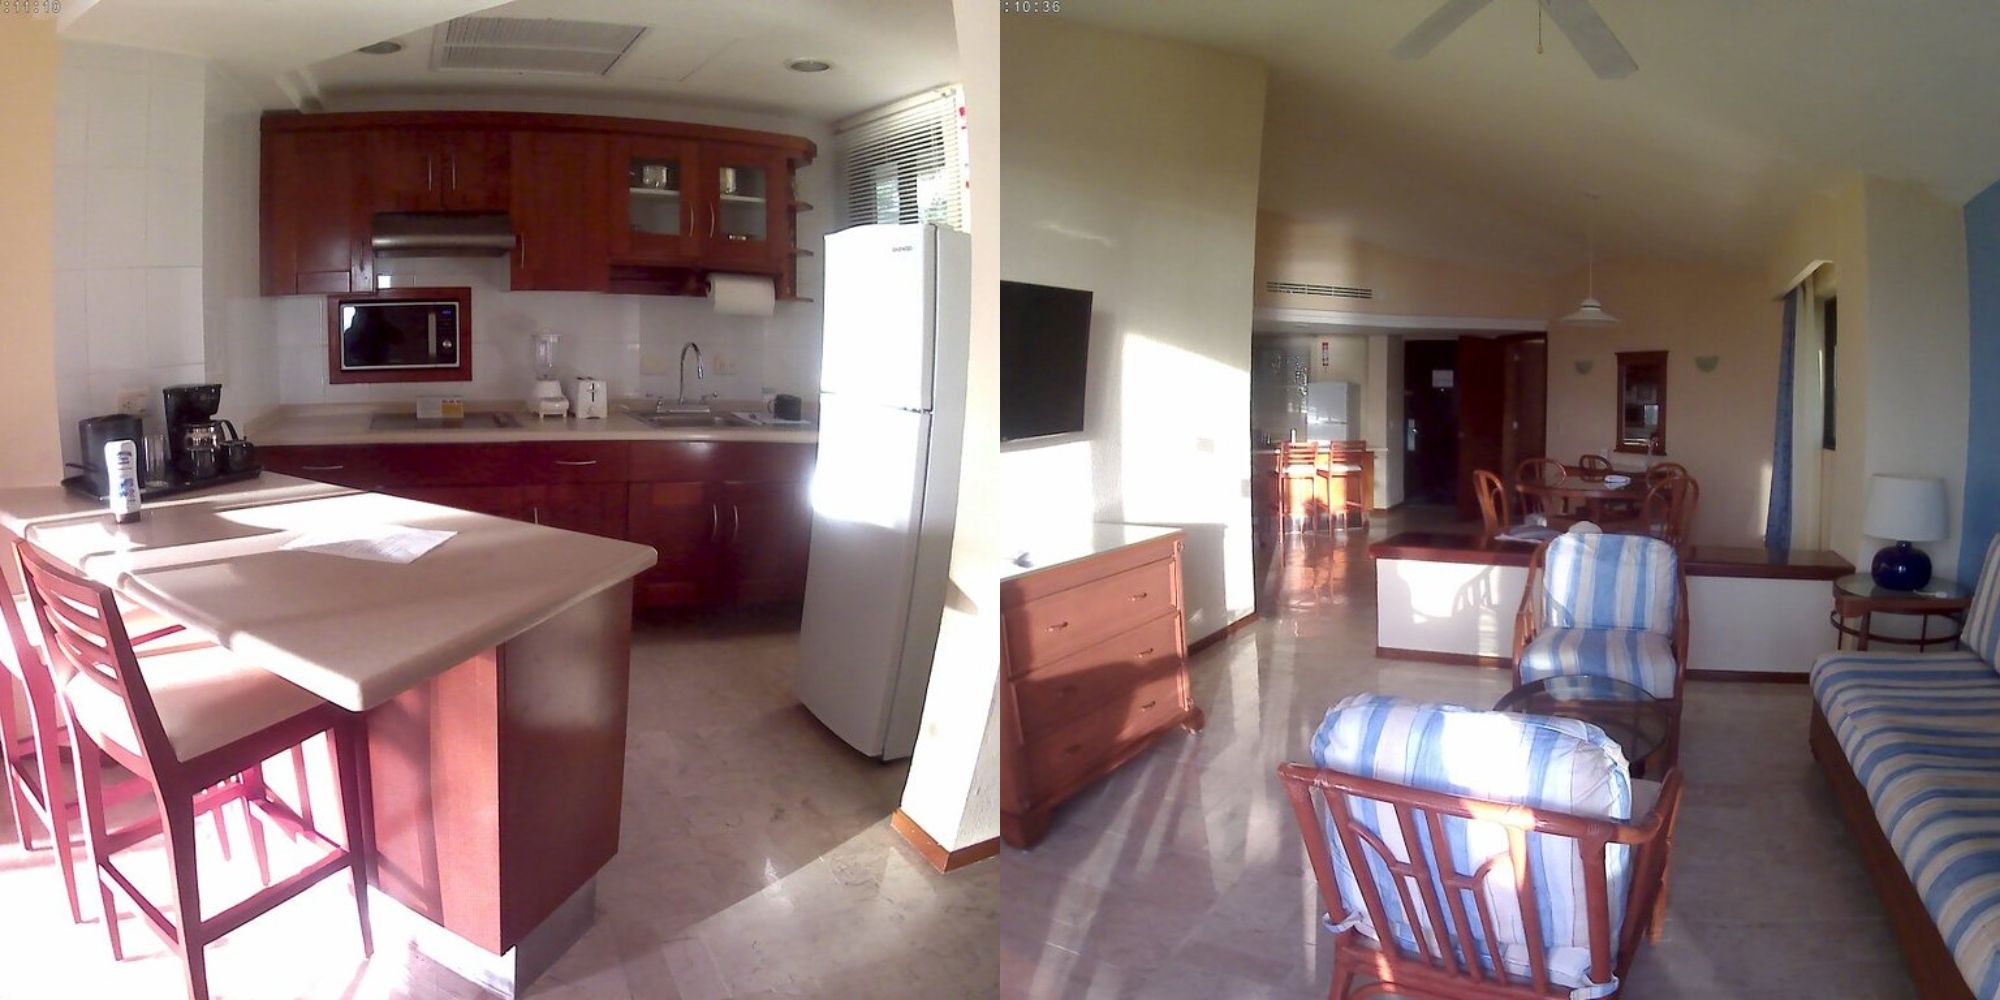 kitchen and living room at resort